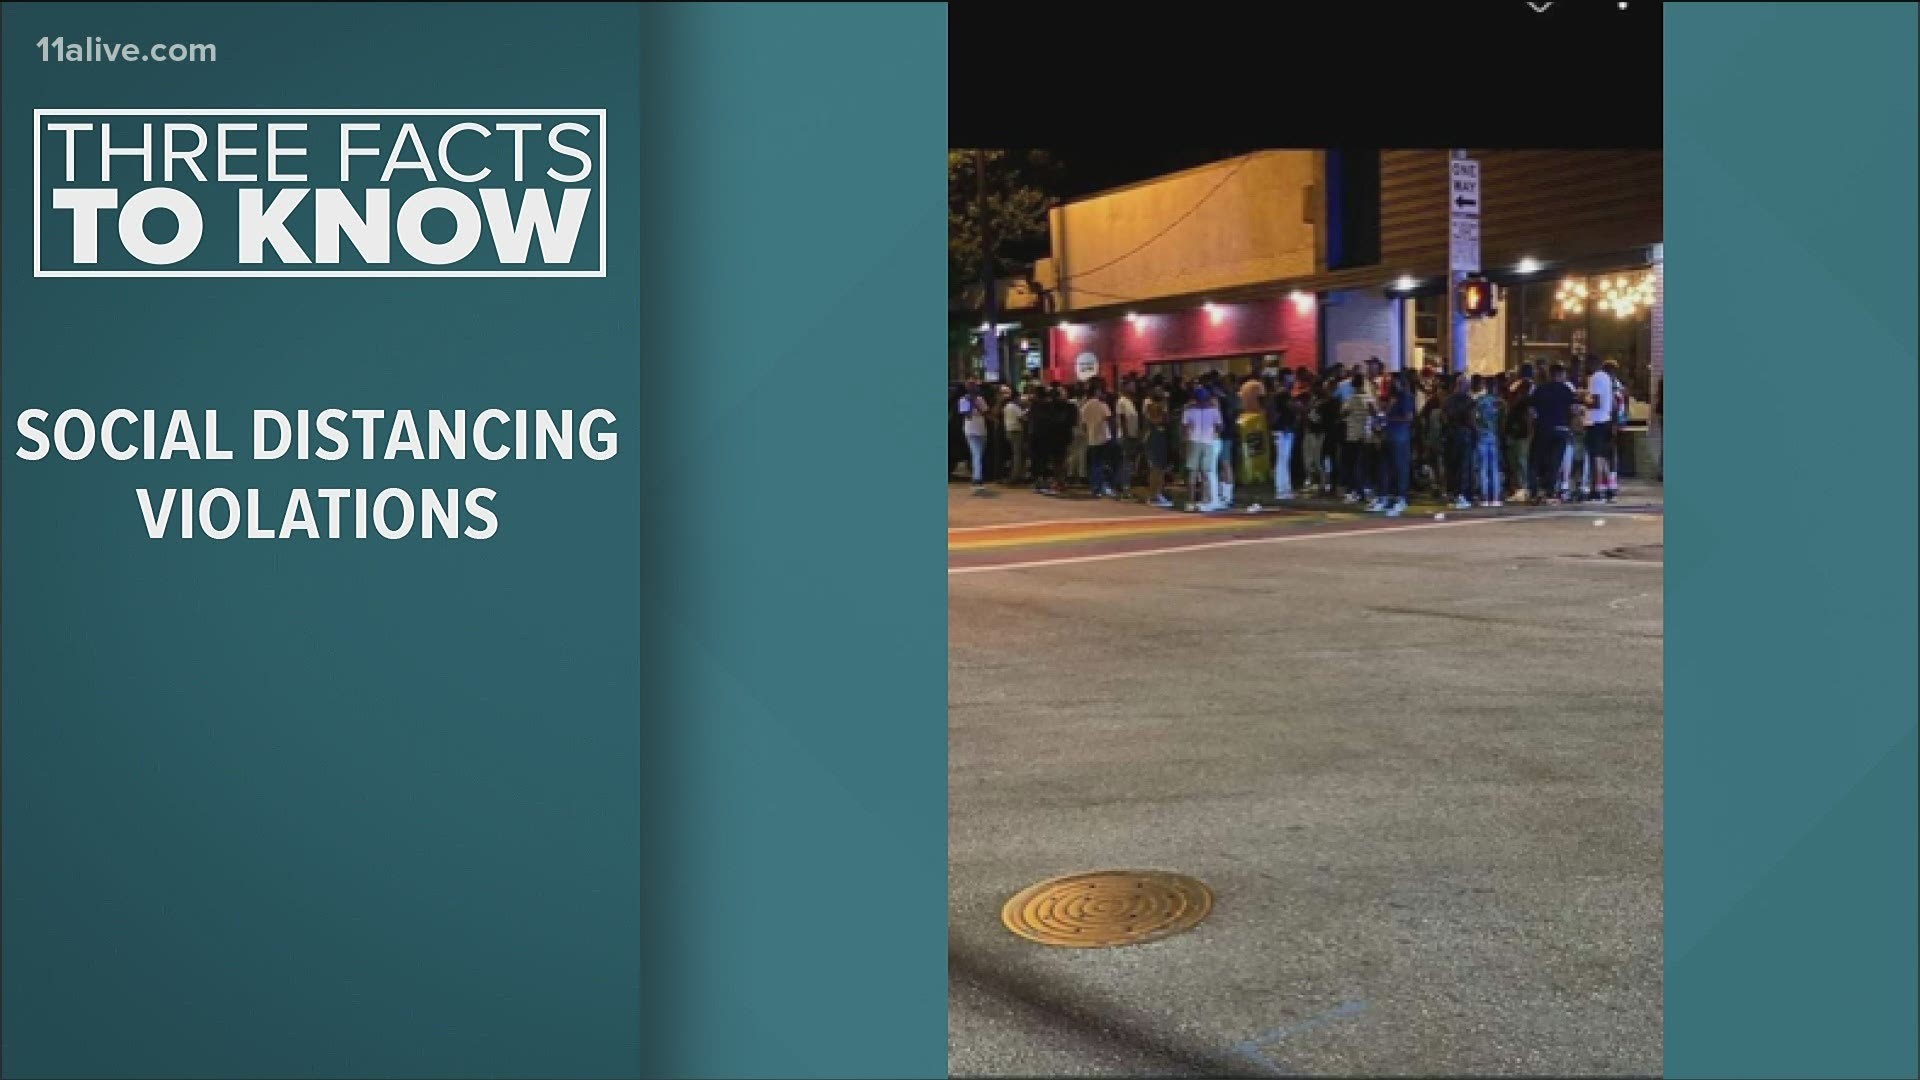 The crowds were so packed that it captured the attention of an 11Alive viewer, who sent in a photo of people waiting in line to get inside.